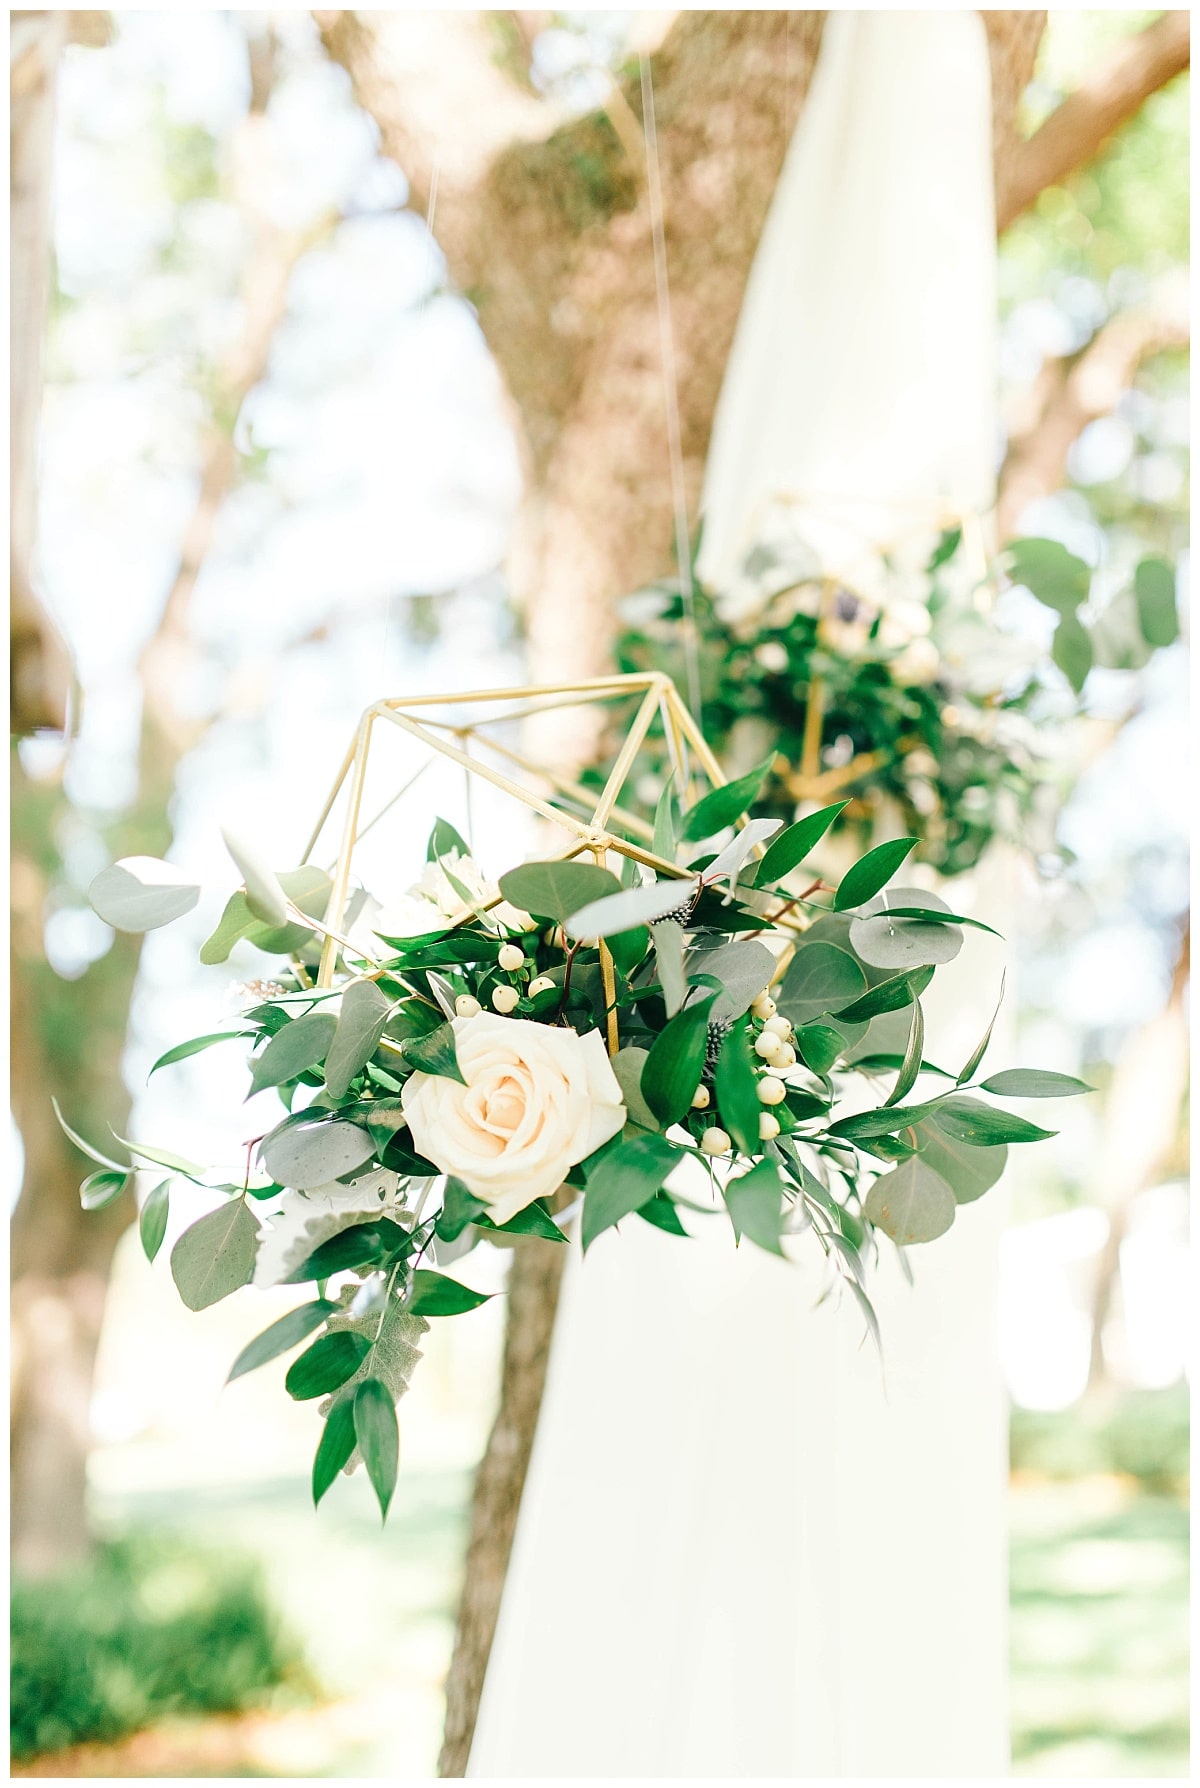 Hanging gold geo's filled with fresh greenery and garden roses hung from simple ivory drapery